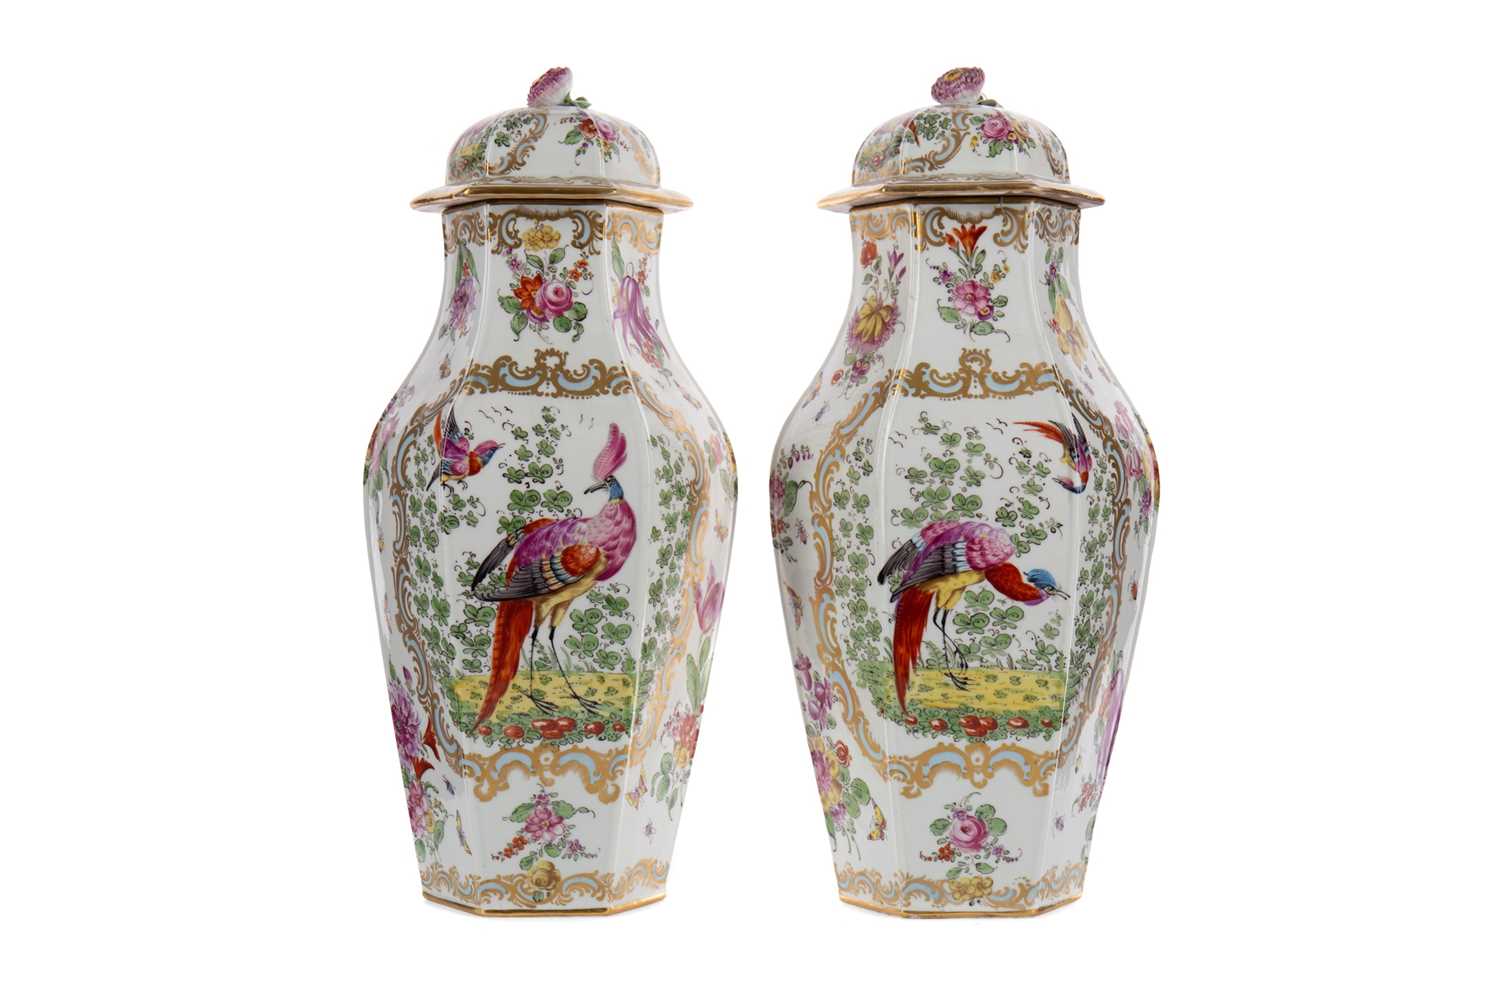 Lot 202 - A PAIR OF LATE 19TH CENTURY CONTINENTAL PORCELAIN VASES AND COVERS